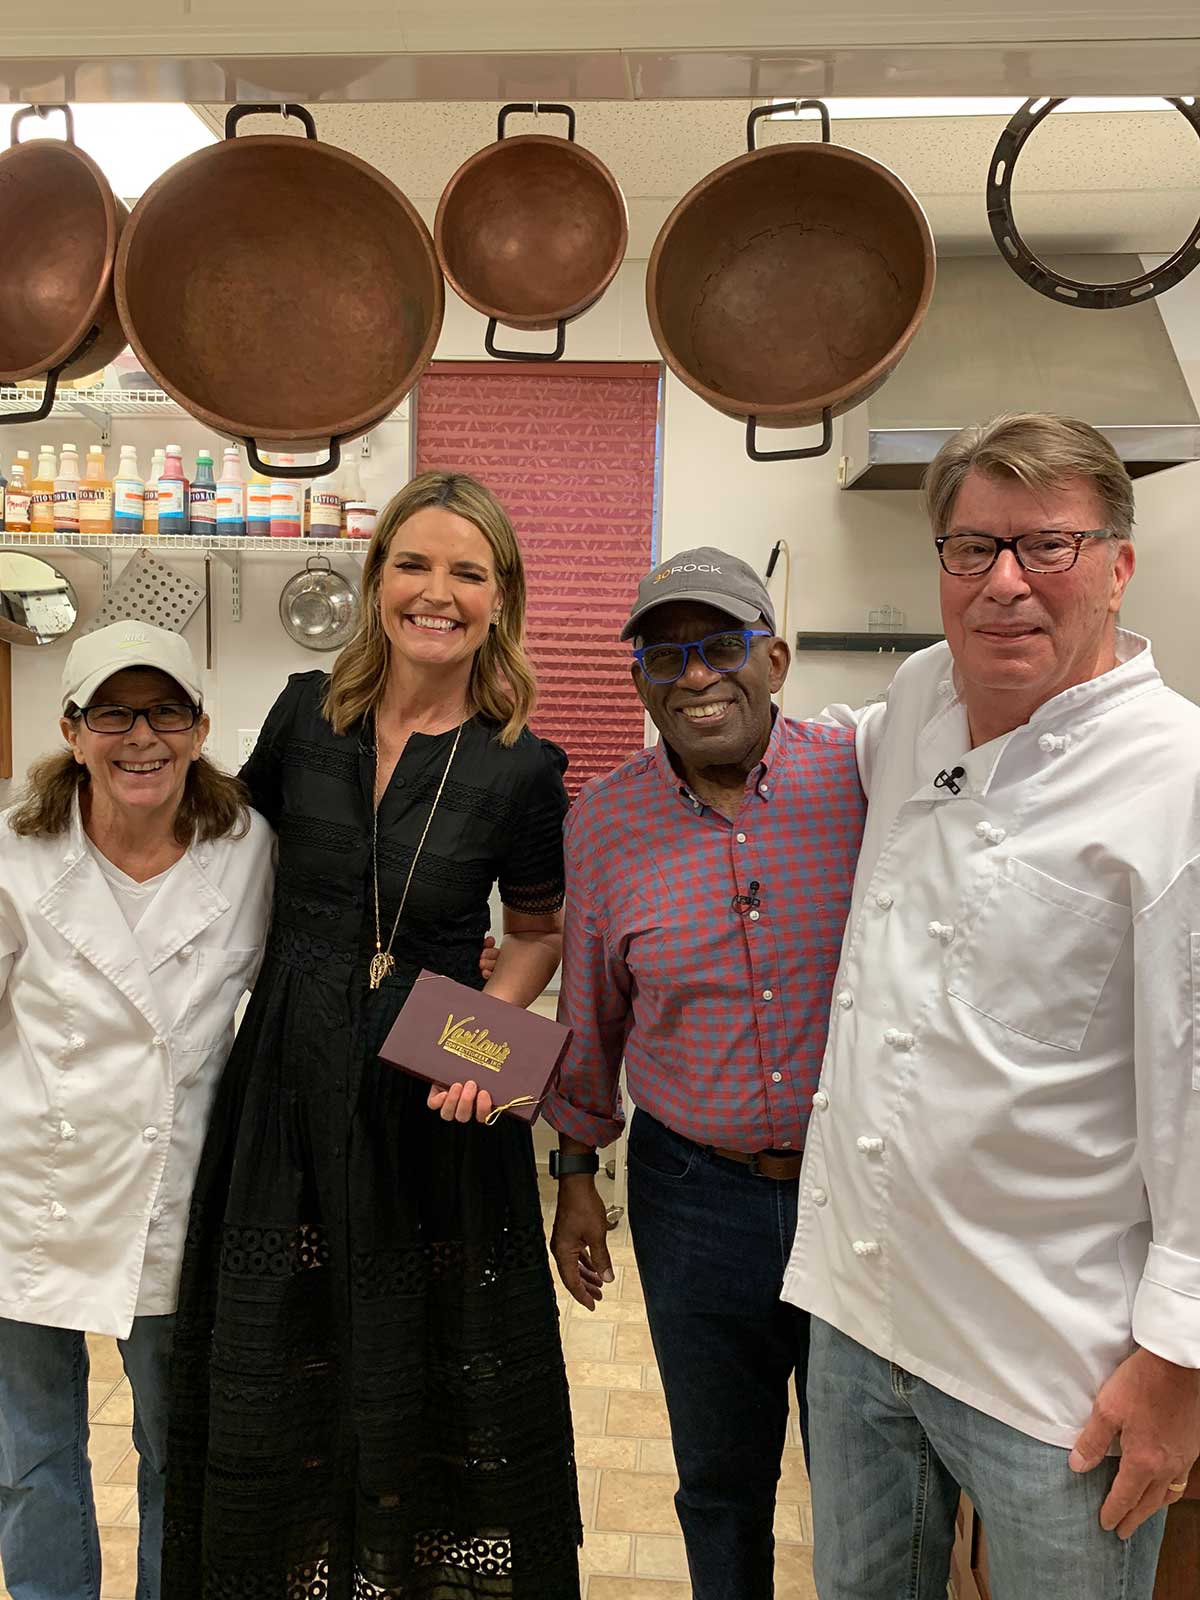 The Today Show visited Vasilow's this past summer (2021)